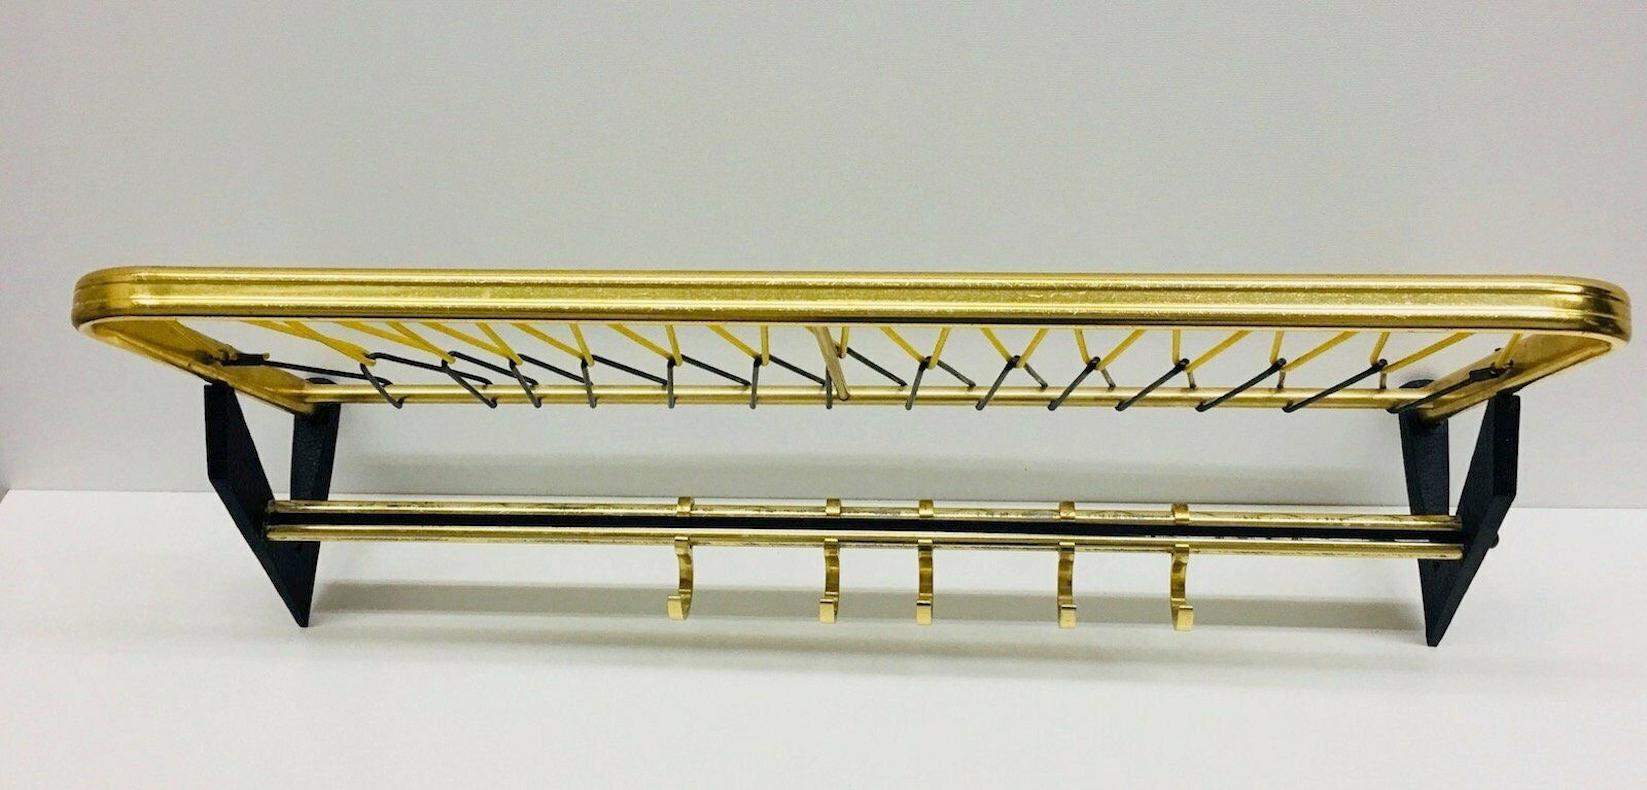 Classic Mid-Century Modern, 1950s wardrobe coat rack Art Deco style German. Nice addition to your room, entry hall or just for your collection of Design items. Made of metal and plastic strings. Found at an estate sale in Vienna, Austria.